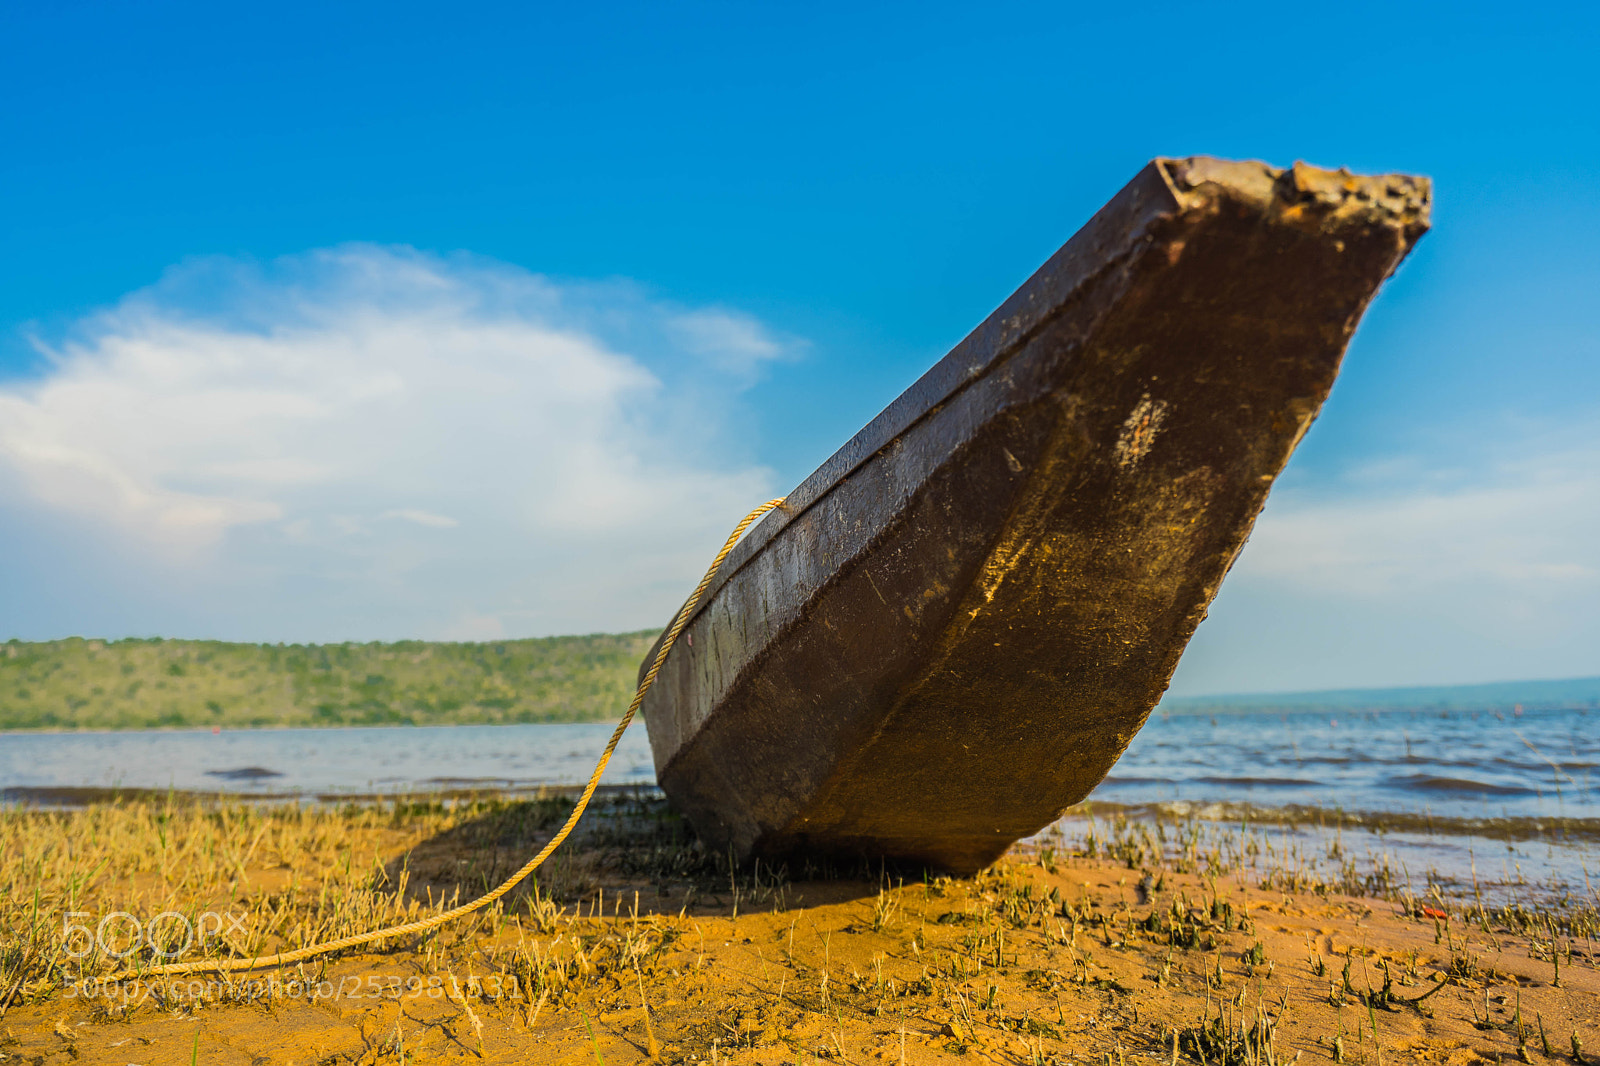 Sony a7 II sample photo. Wood boat on a photography